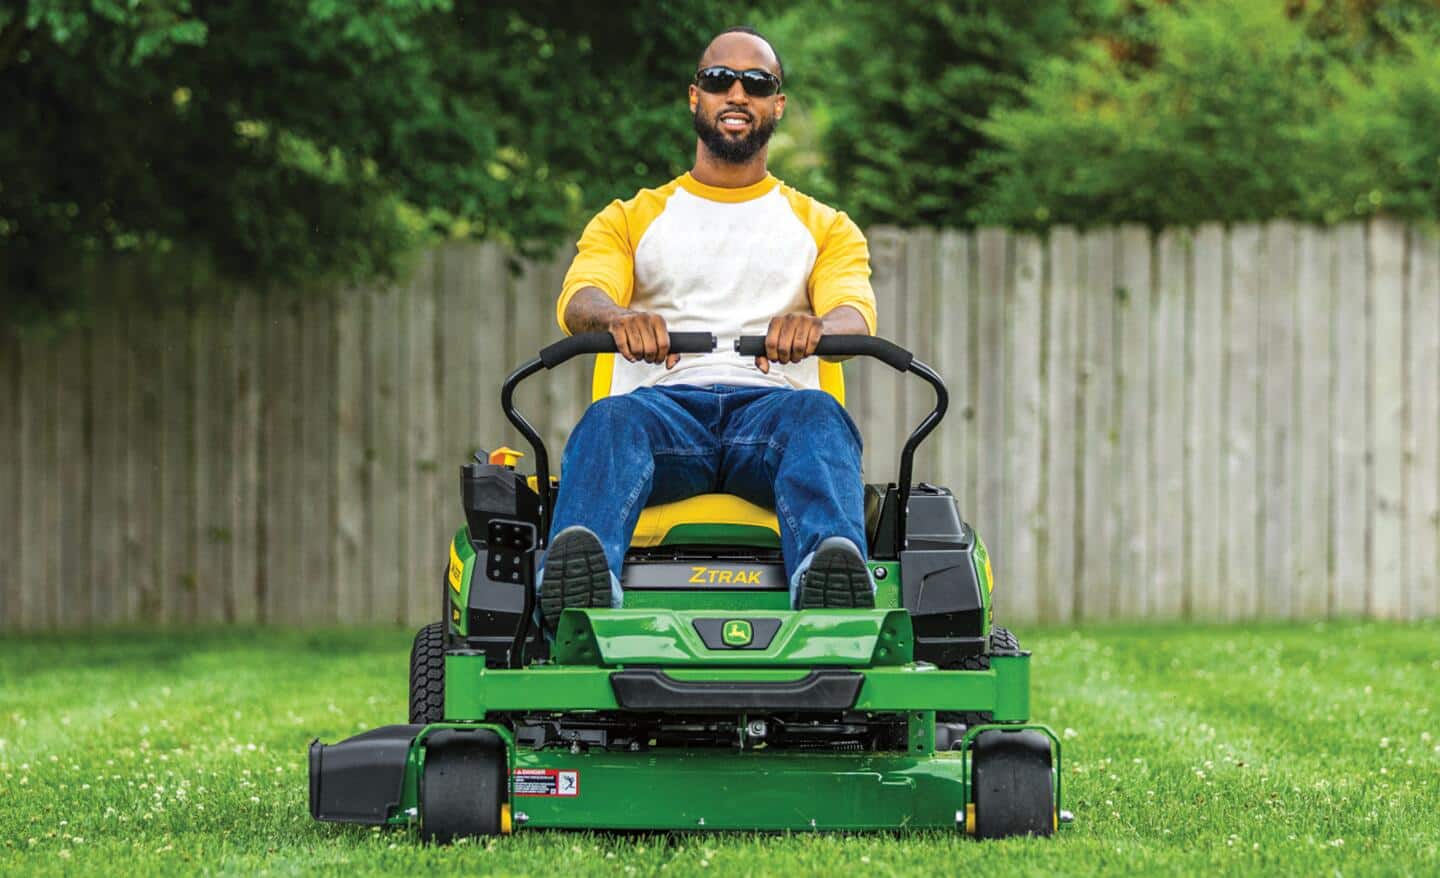 A man wears safety goggles to use his riding mower.